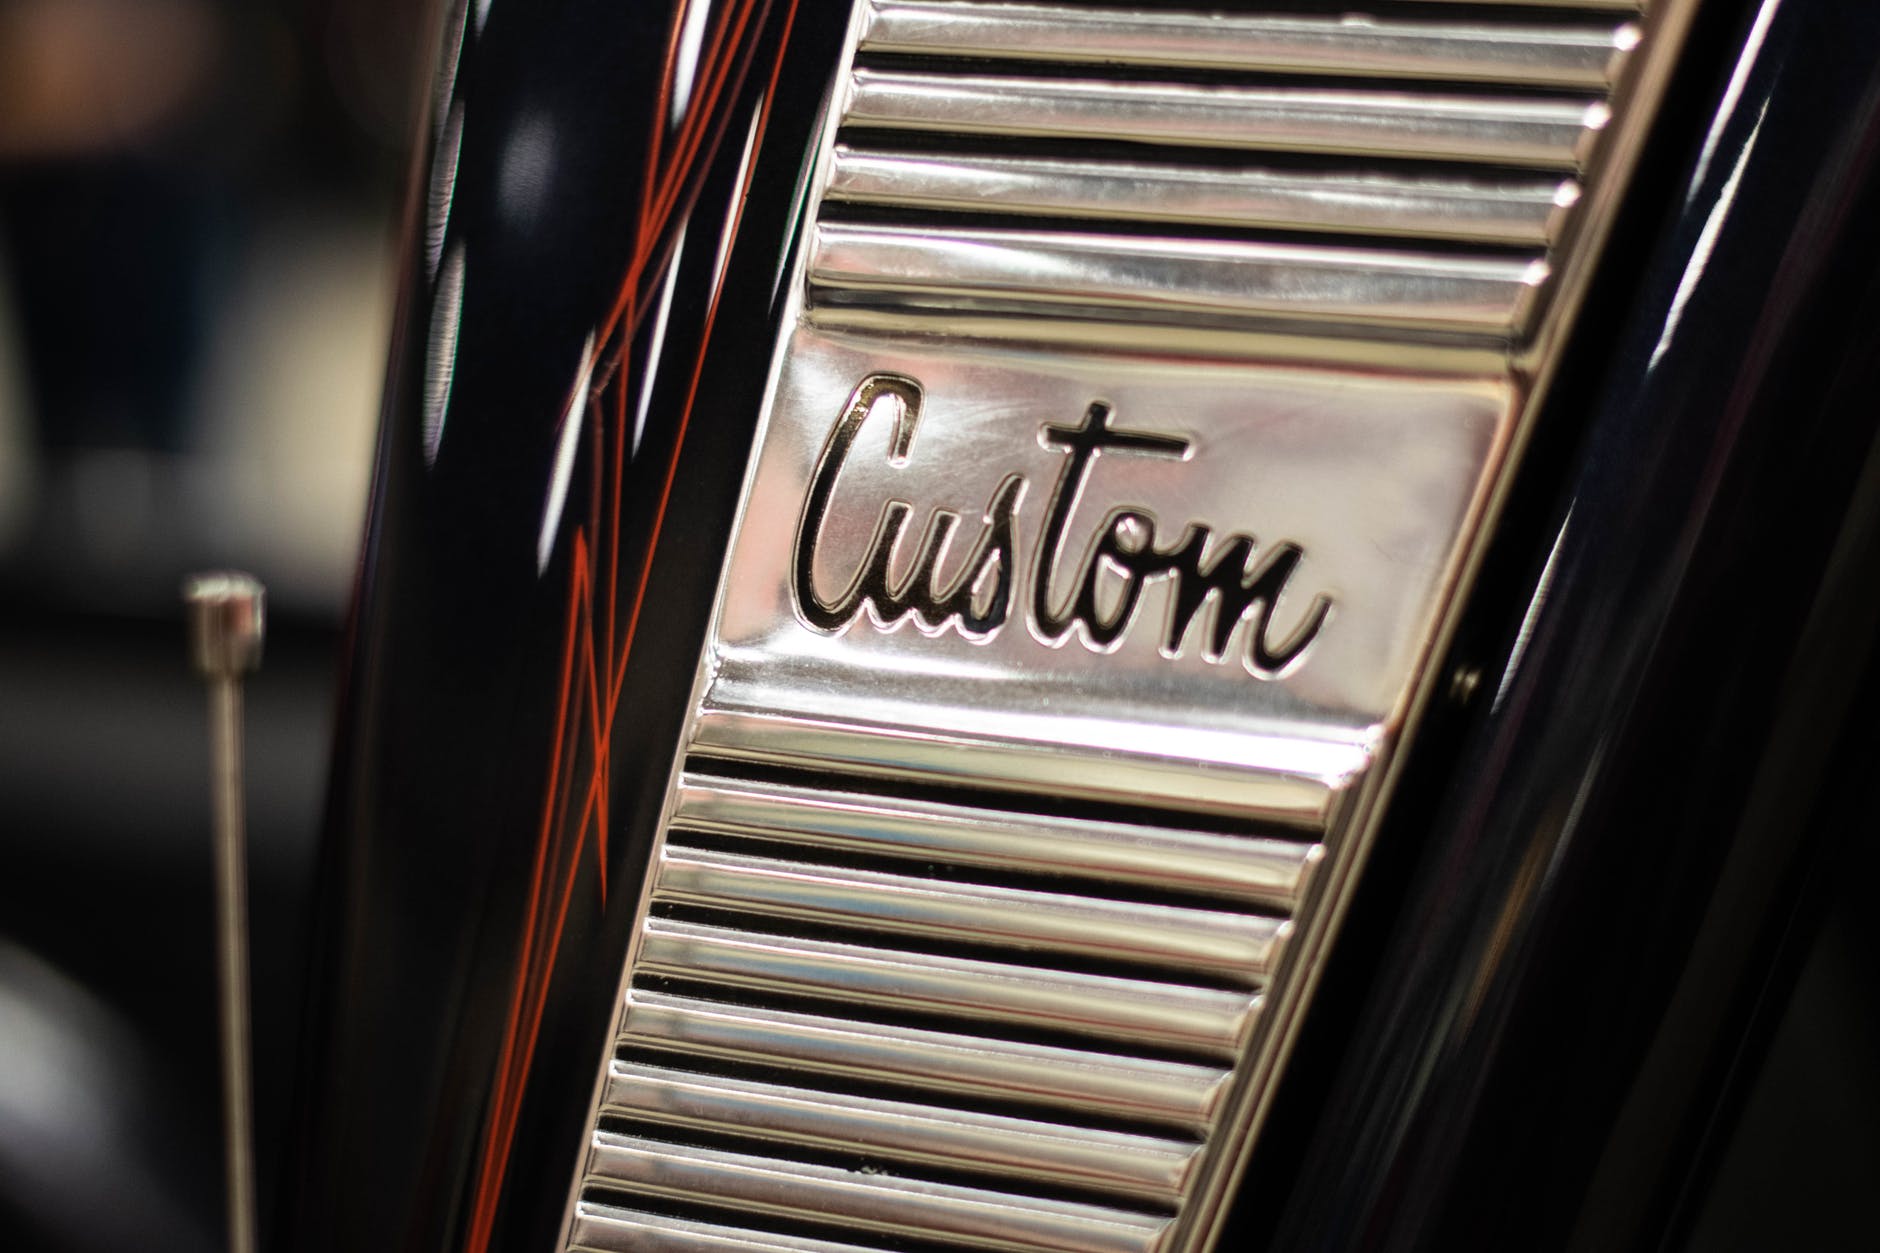 The word 'custom' engraved into metal